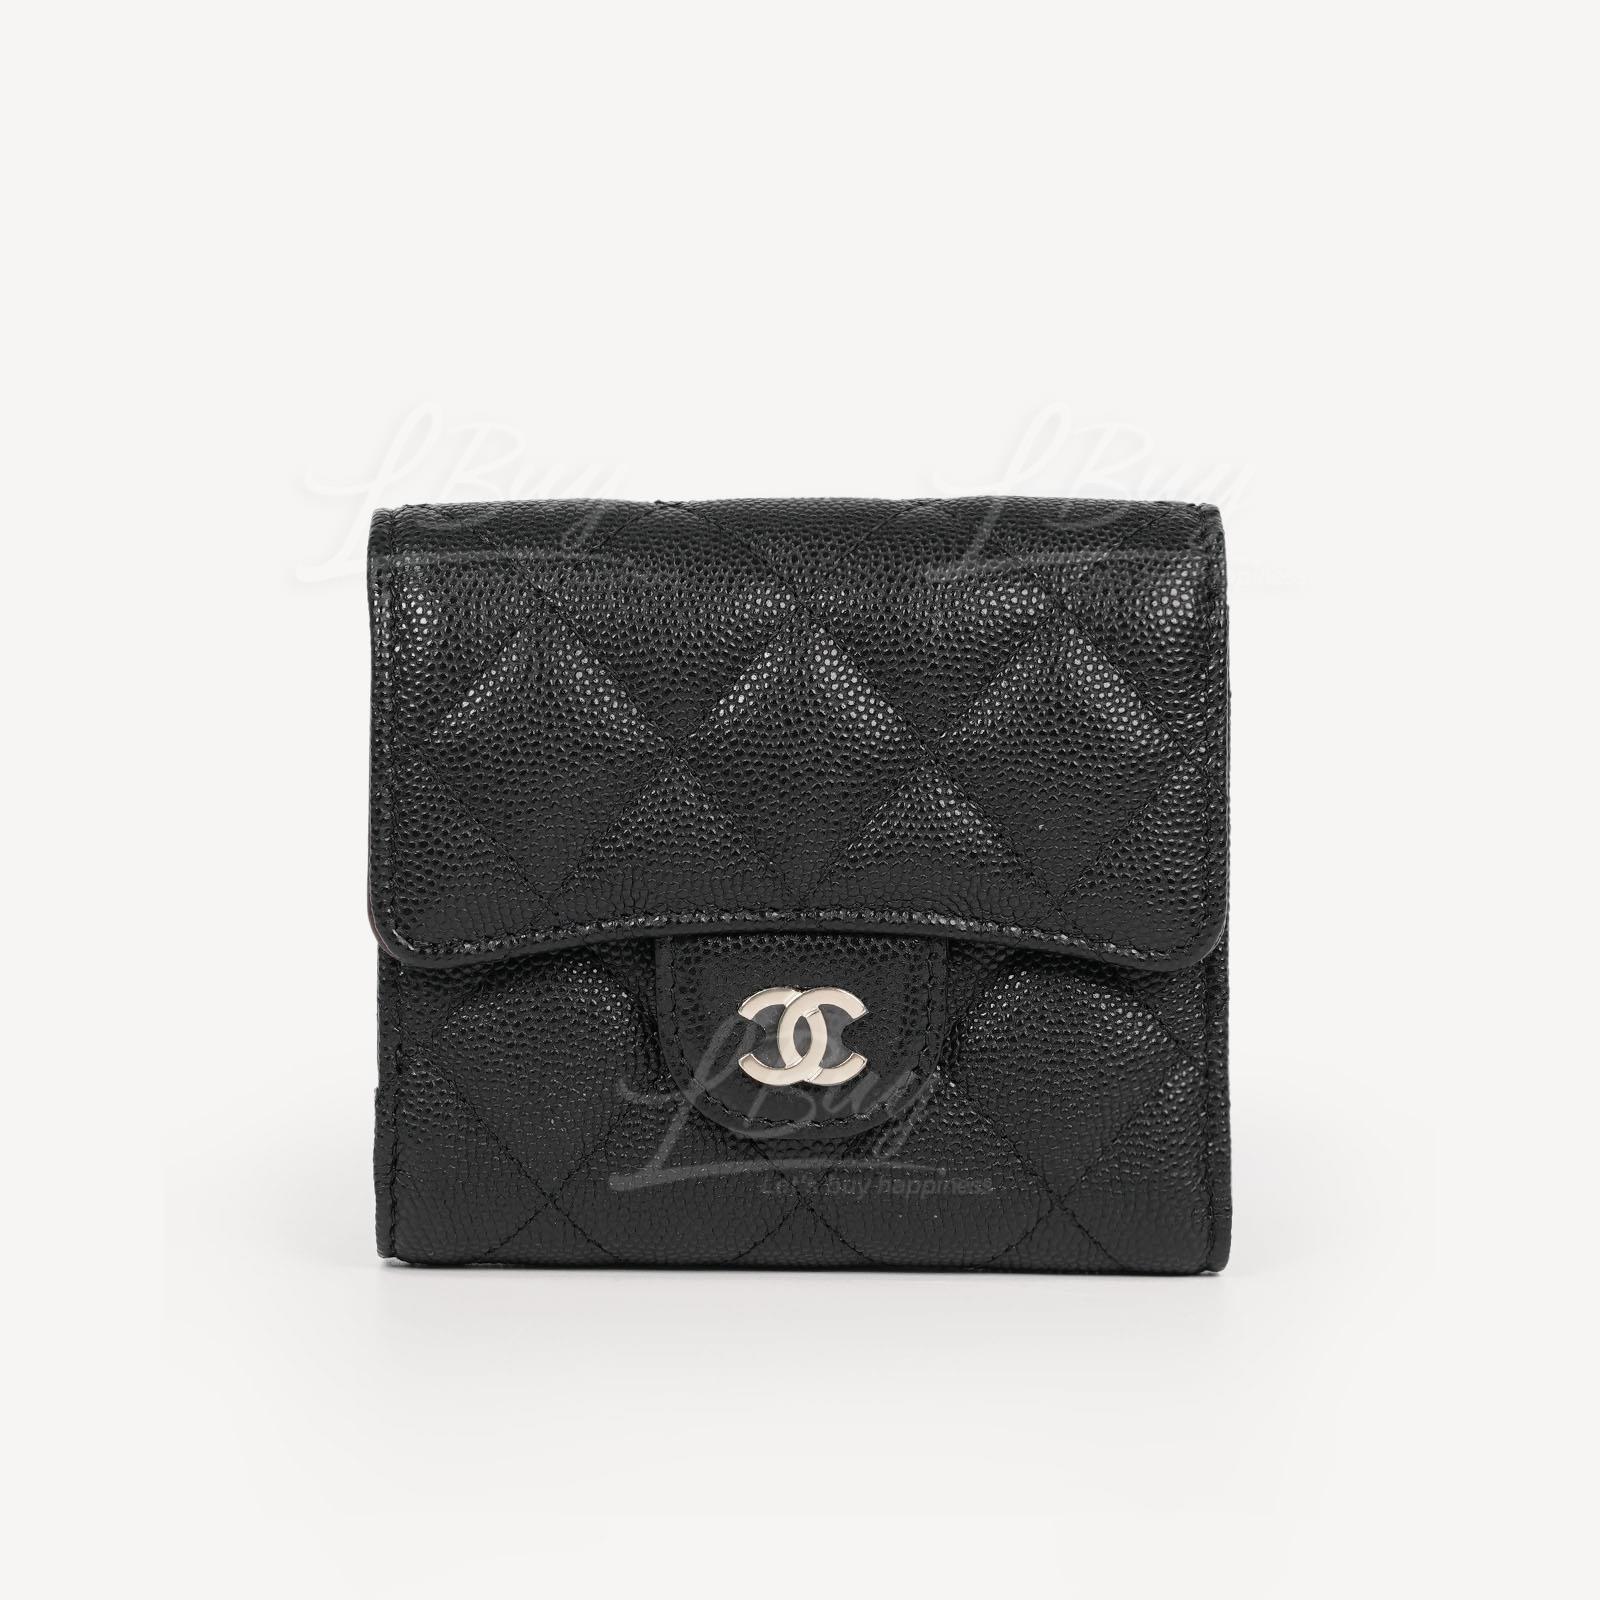 Chanel Classic Small Flap Wallet Black with Gold Tone Metal AP0231